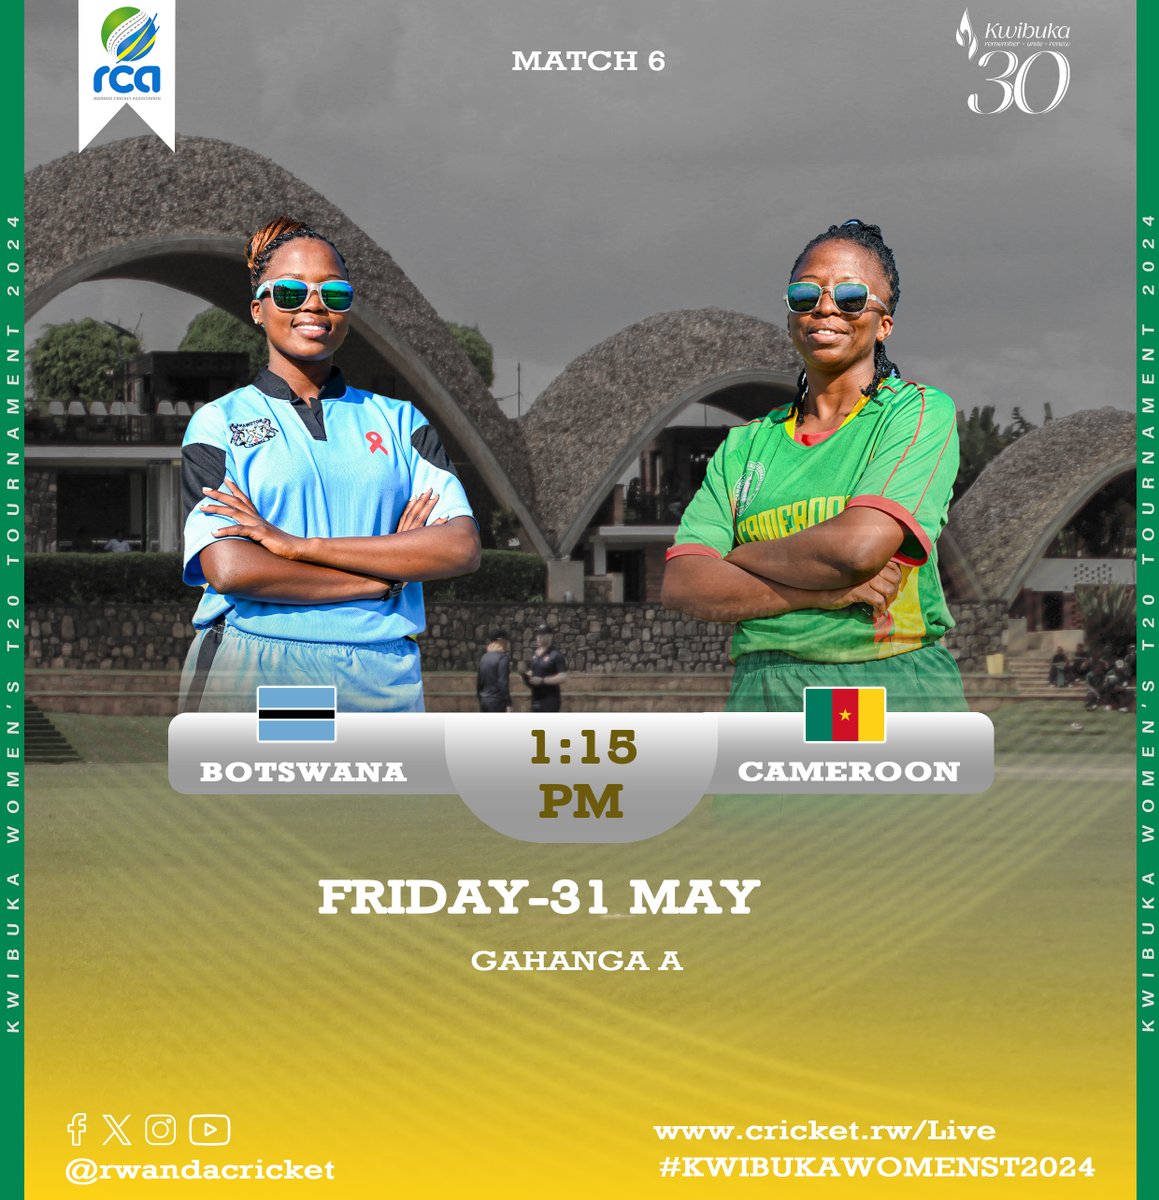 🏏 Kwibuka Cricket 2024 - Game 6🏏
🇧🇼 Botswana Women vs. 🇨🇲 Cameroon Women
Tomorrow Both teams will be looking to bounce back after losing their first games. Get ready for an intense showdown in the afternoon!
#KwibukaCricket2024 #BotswanaVsCameroon #CricketForAll #LiveCricket